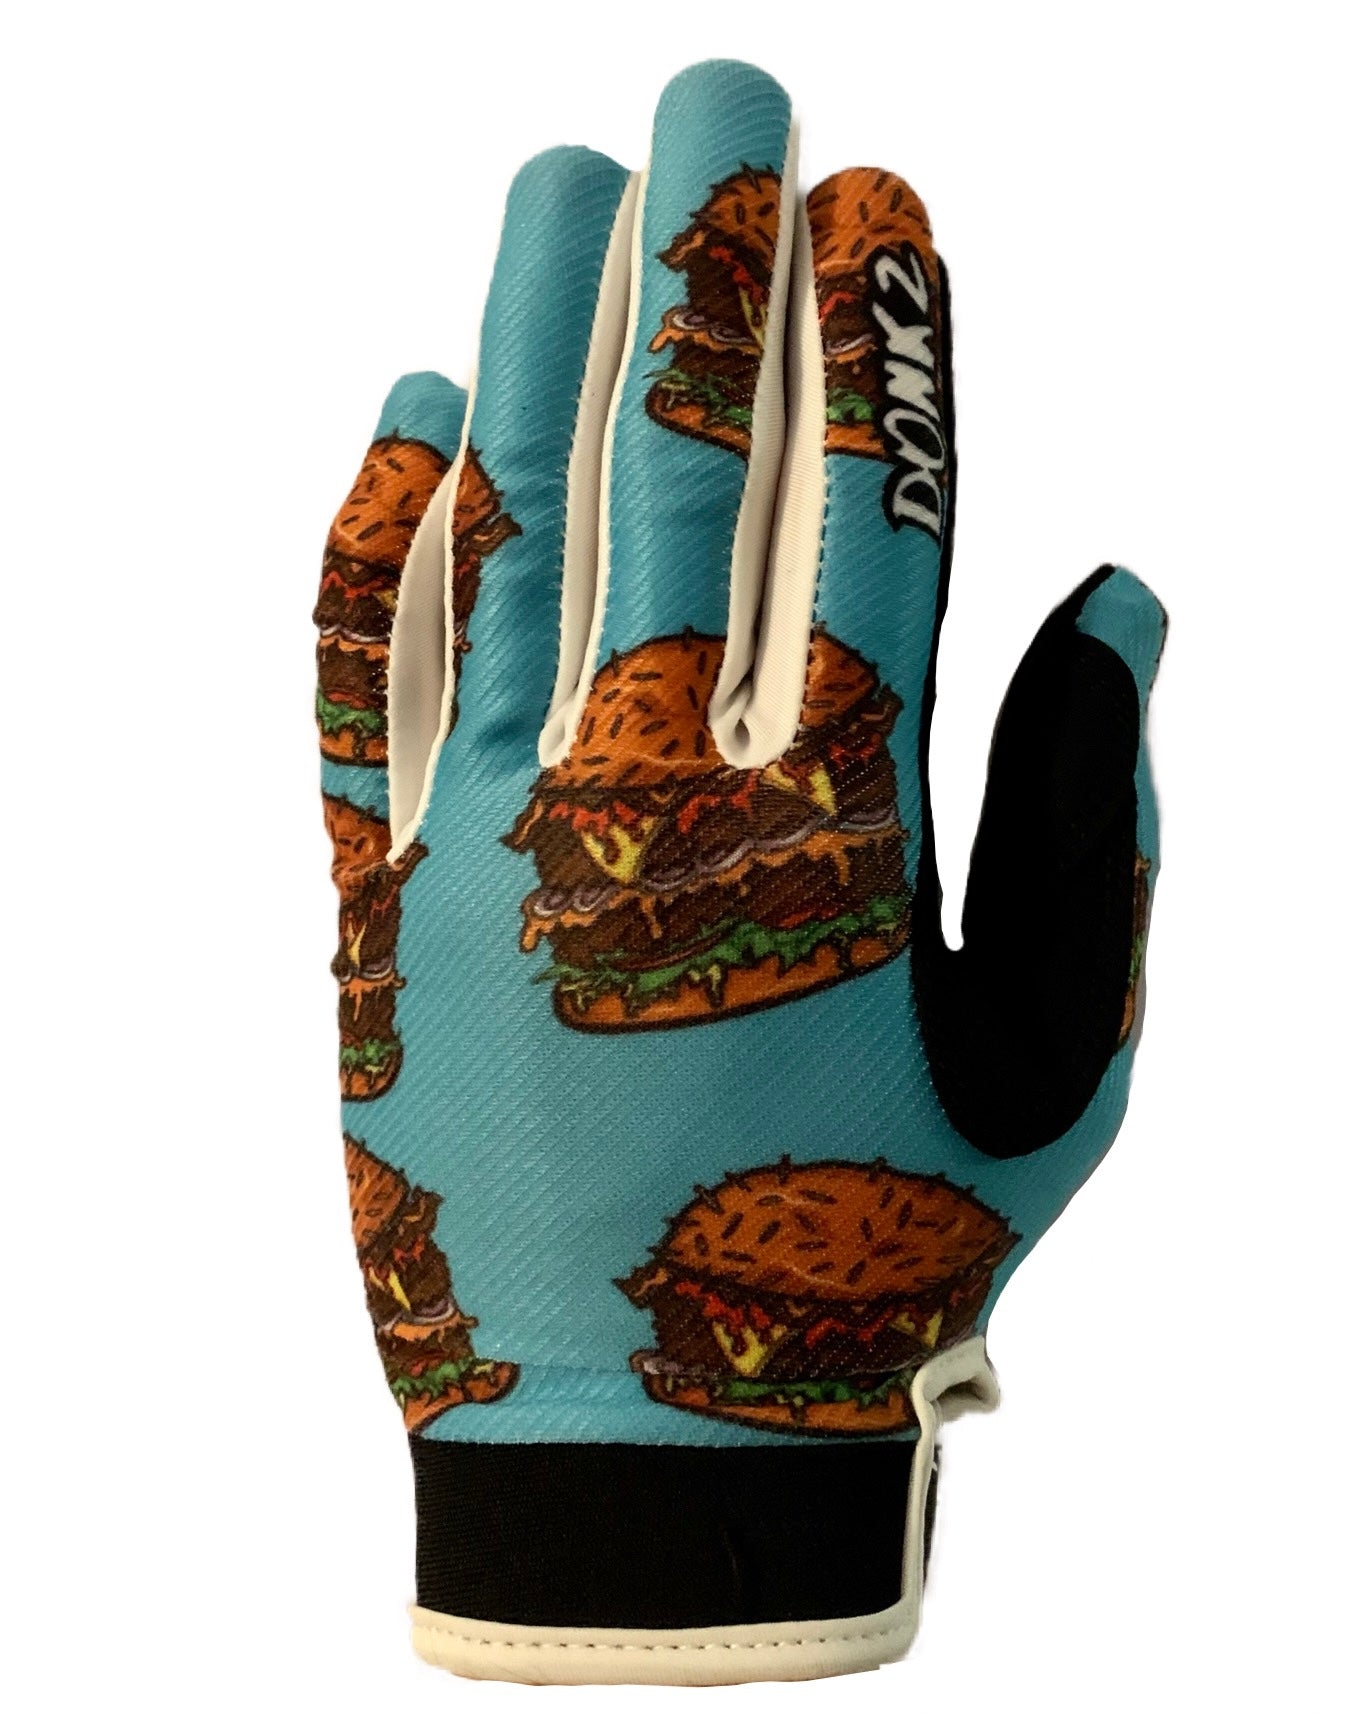 Blue MX gloves with burger print